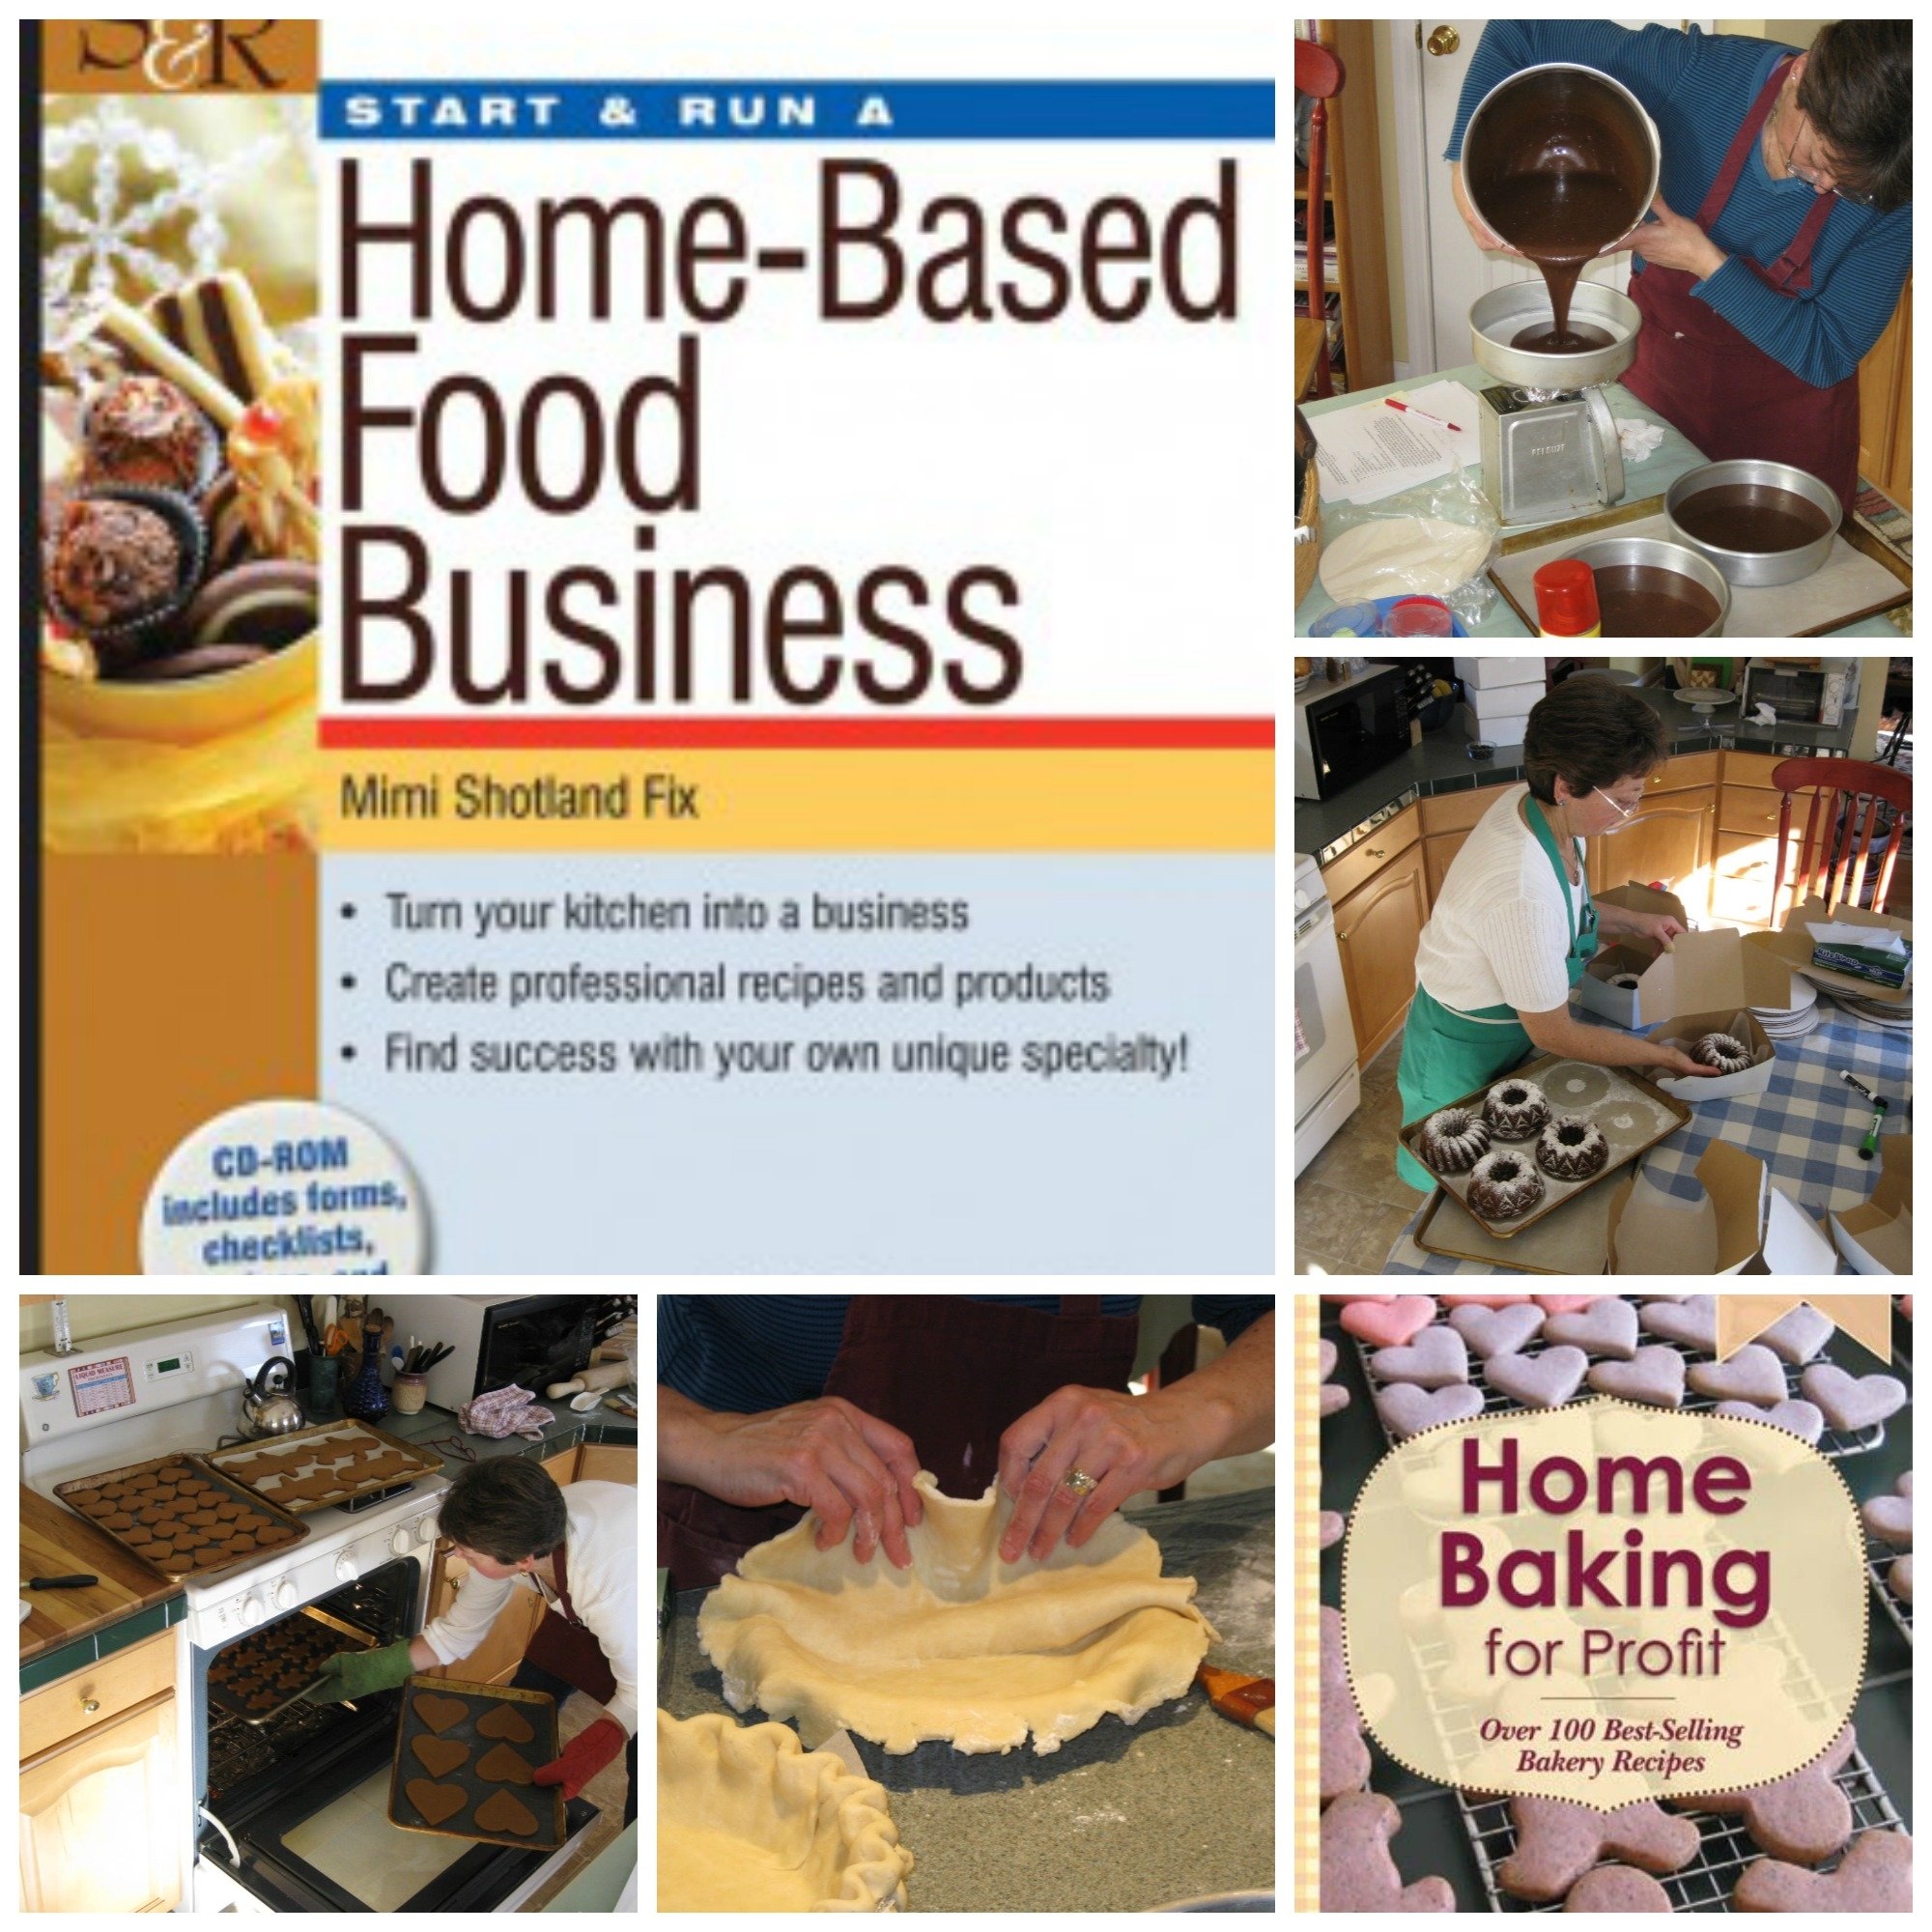 blog-archive-starting-a-home-based-food-business-3.jpg